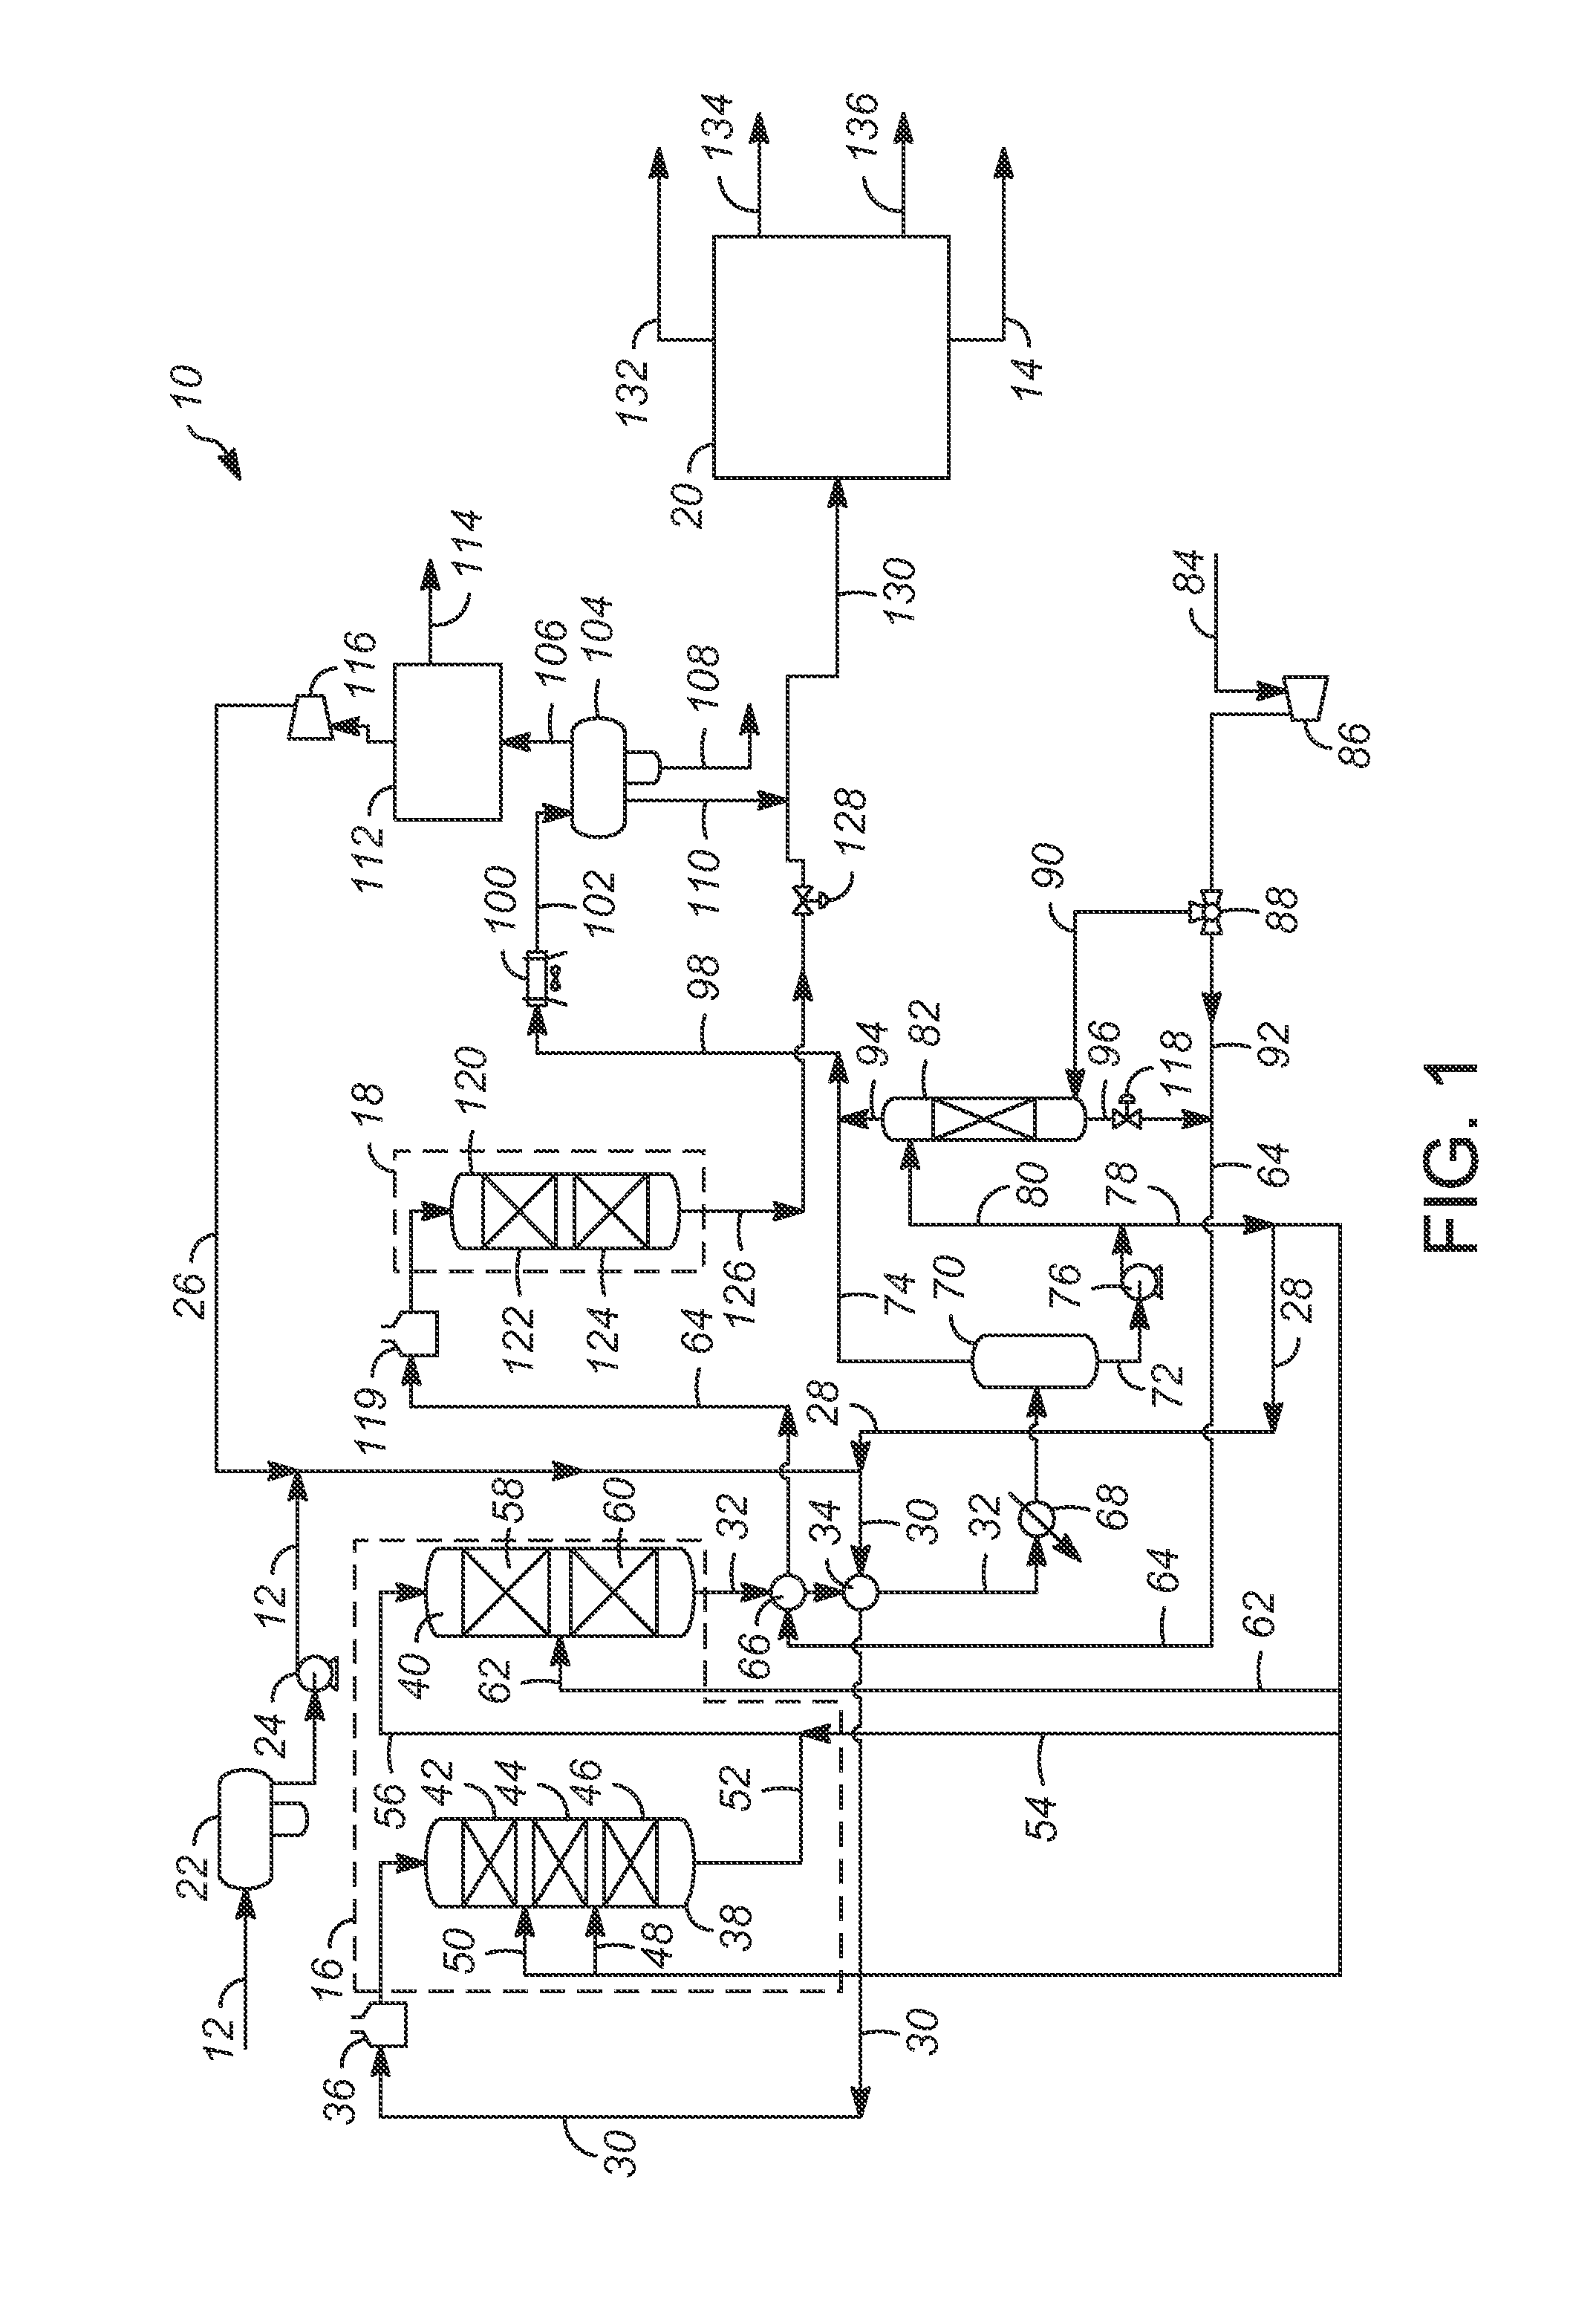 Methods and apparatuses for processing renewable feedstocks